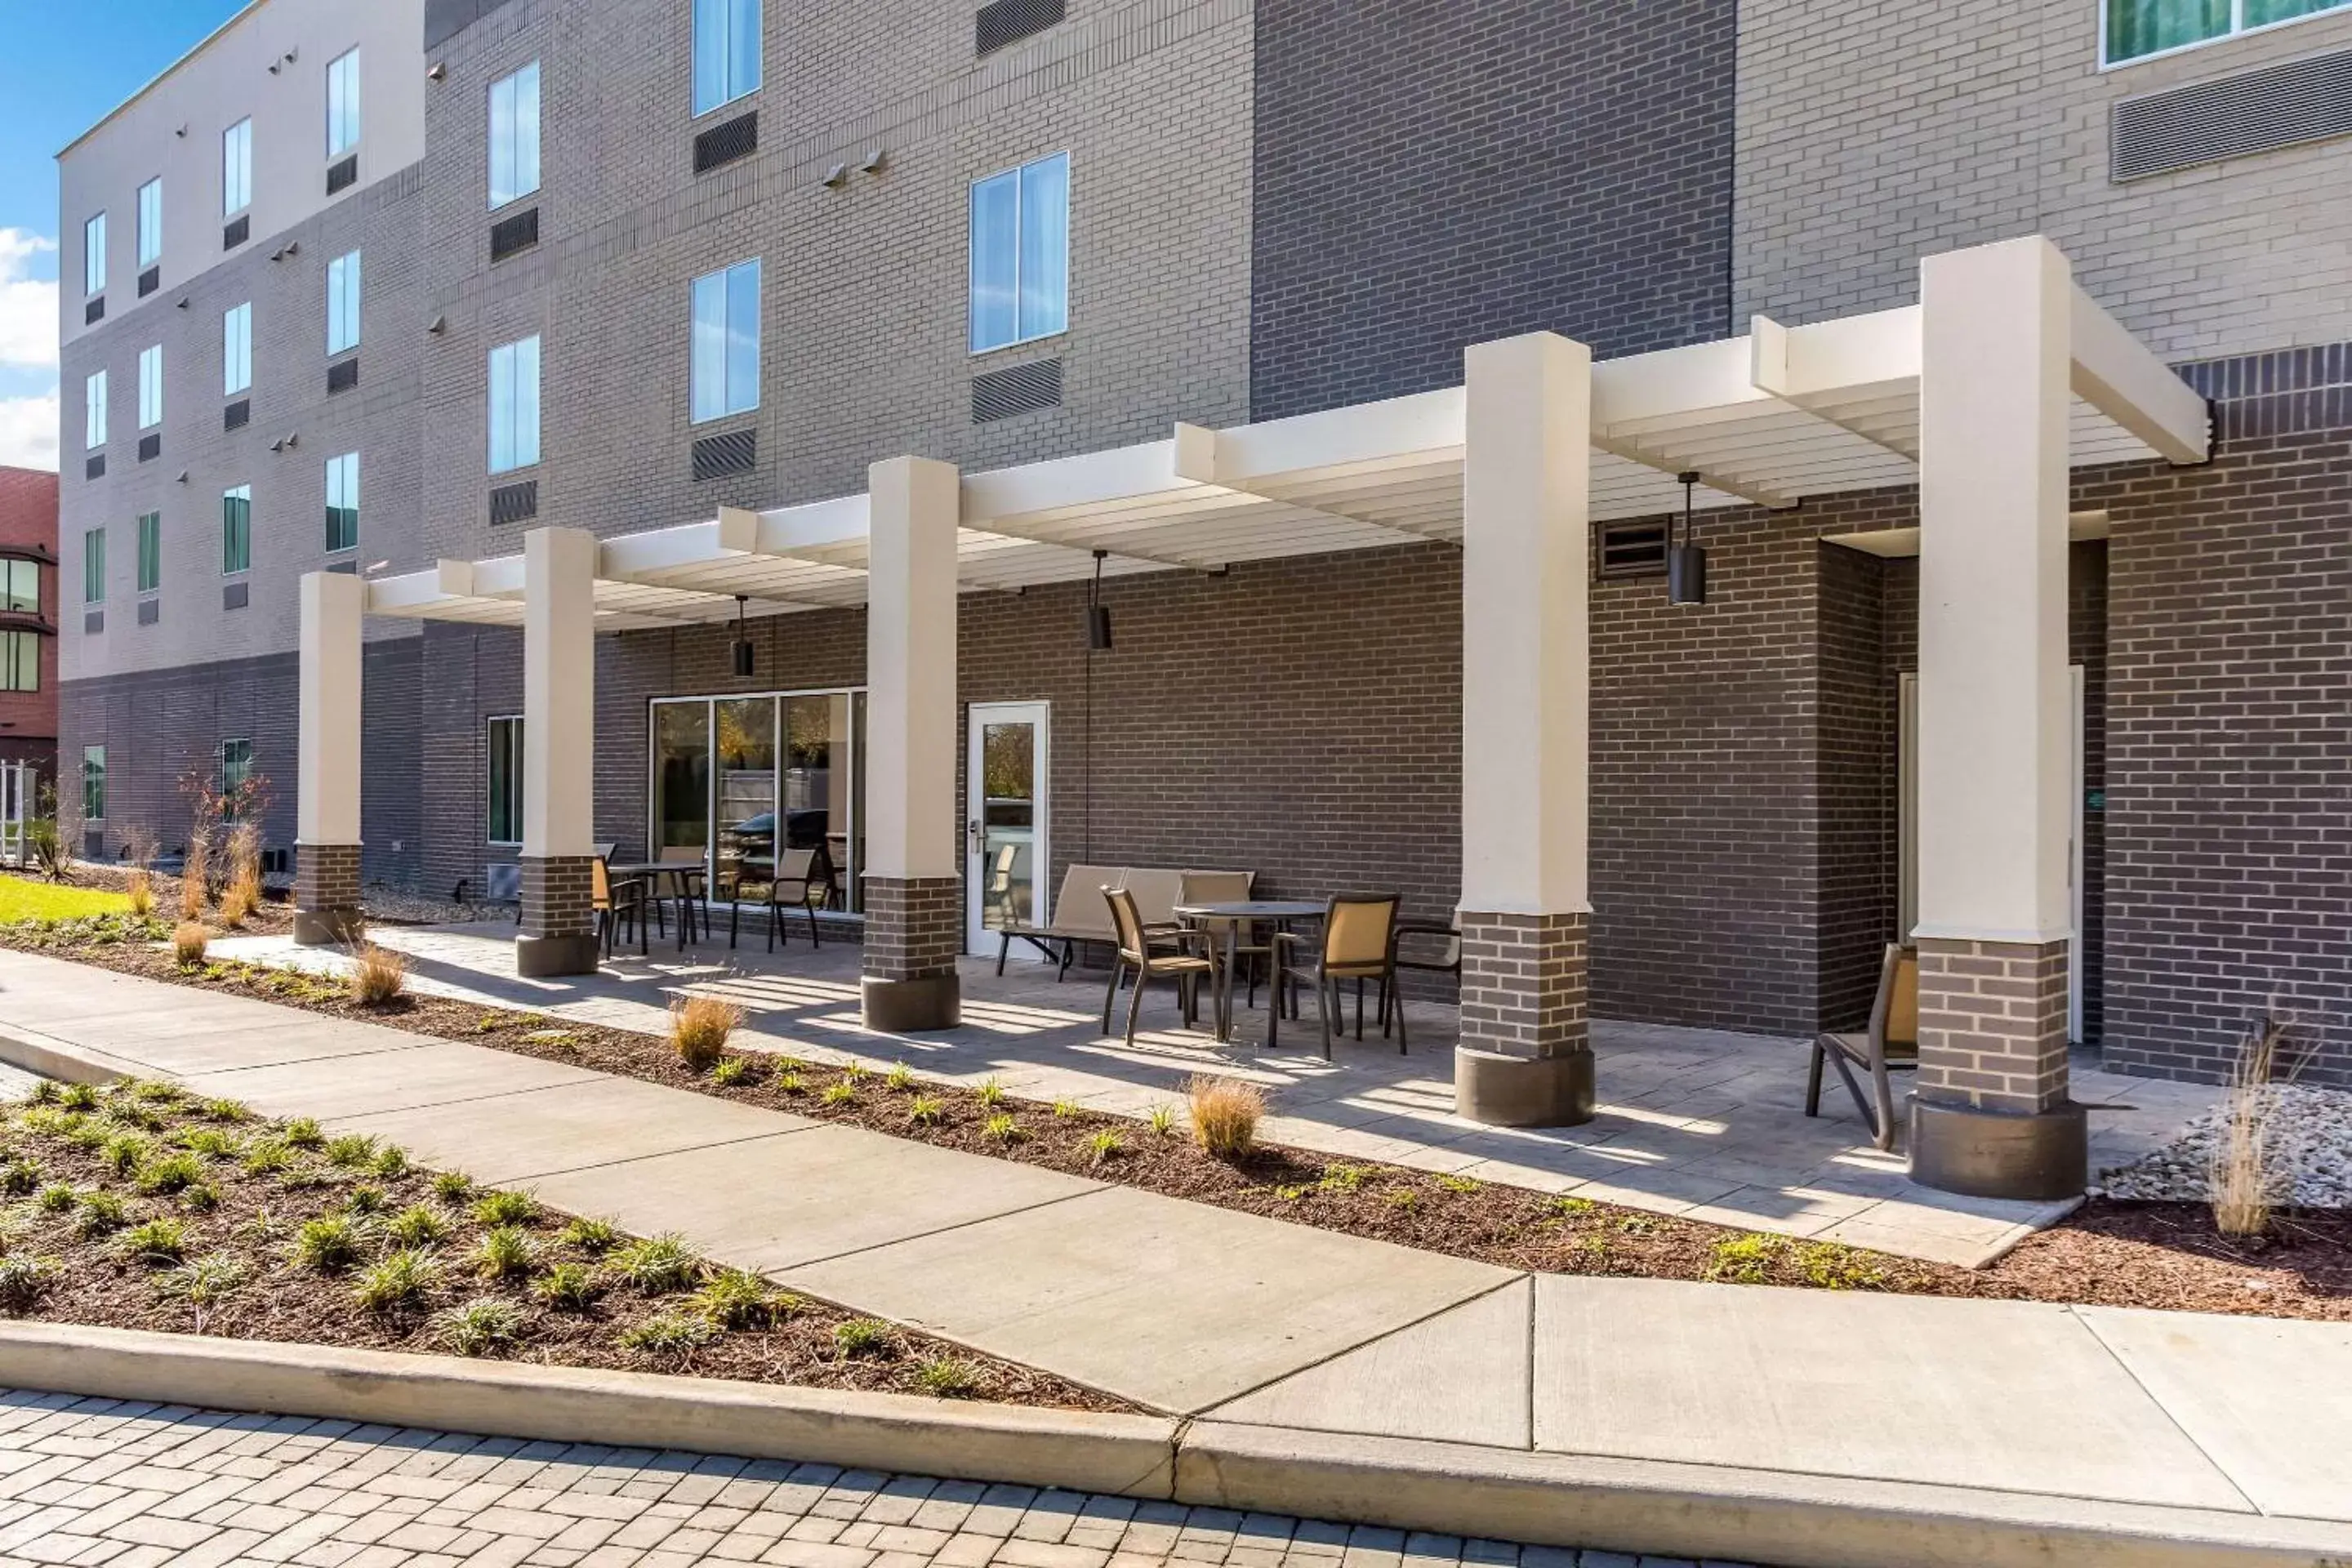 Property building in MainStay Suites Murfreesboro